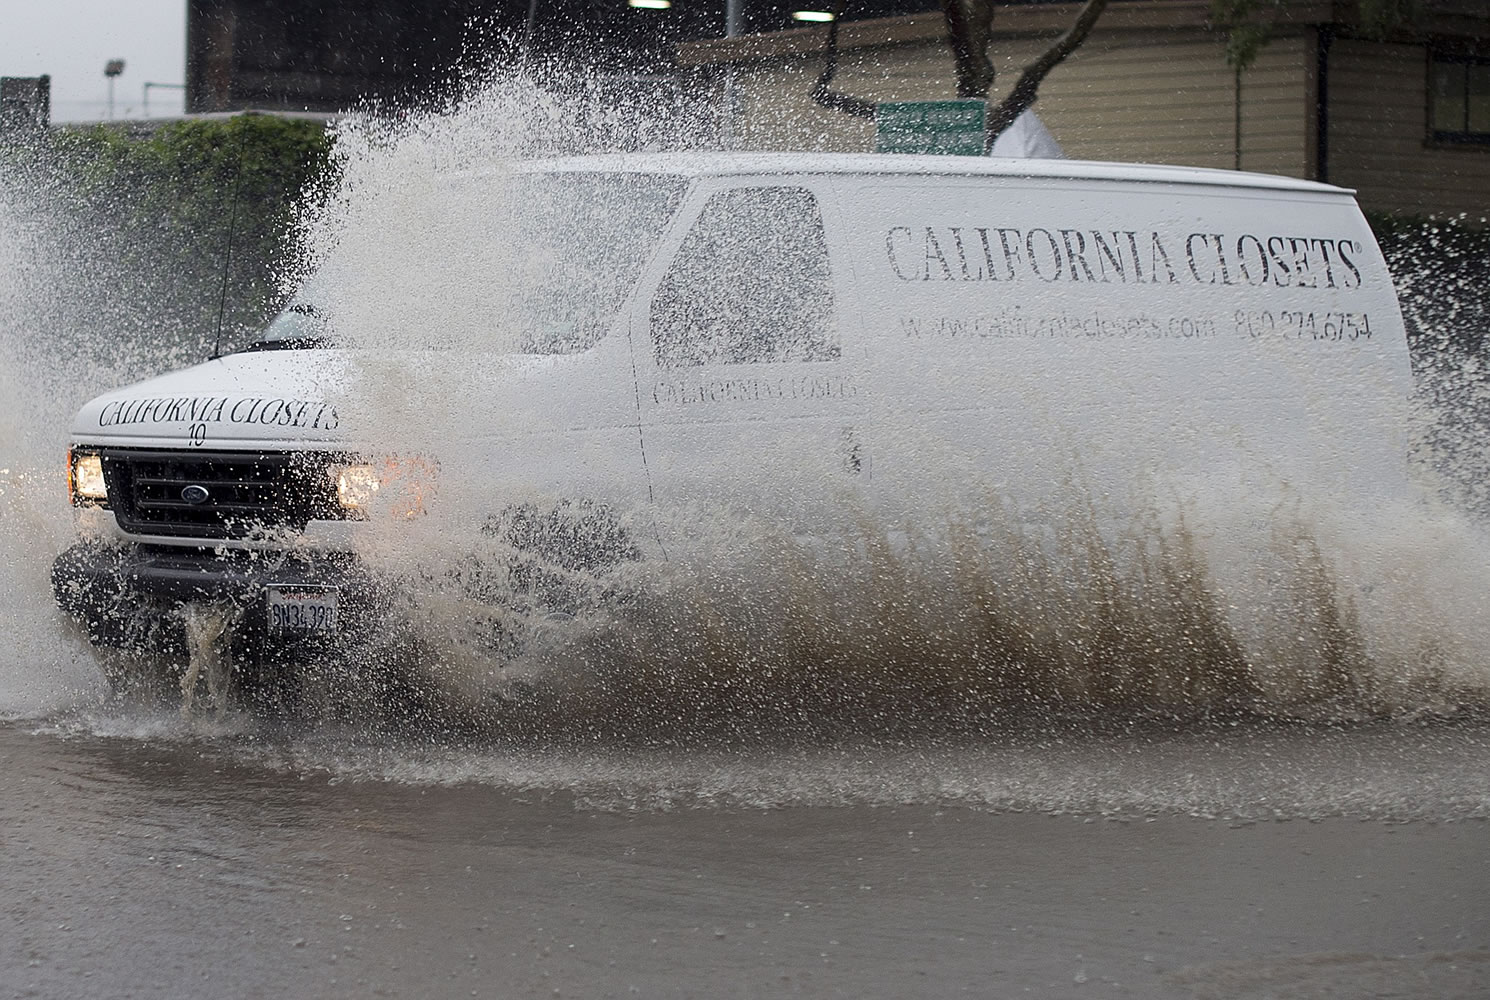 A van navigates a flooded roadway in Berkeley, Calif., on Thursday, Dec. 11, 2014. A powerful storm churned through Northern California Thursday, knocking out power to tens of thousands and delaying commuters while soaking the region with much-needed rain.